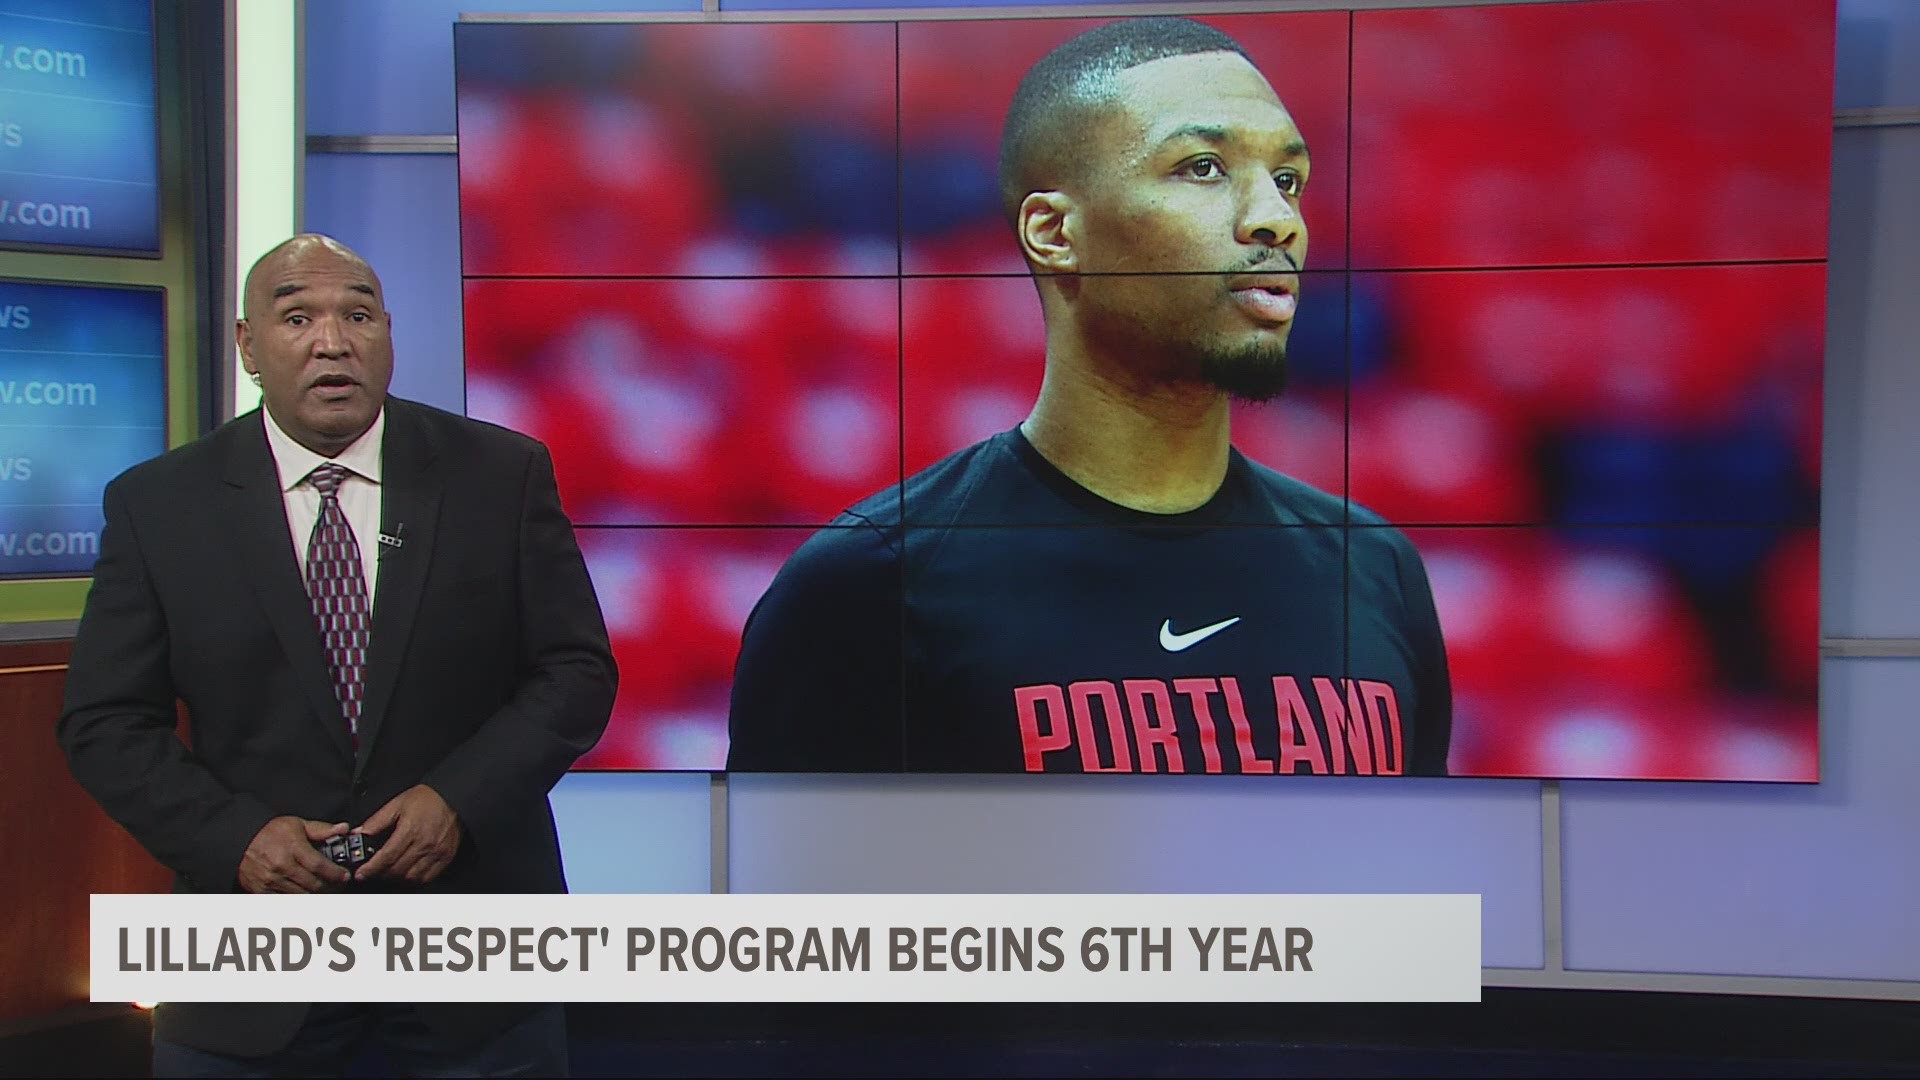 Damian Lillard spoke to students as part of his "Respect" campaign.